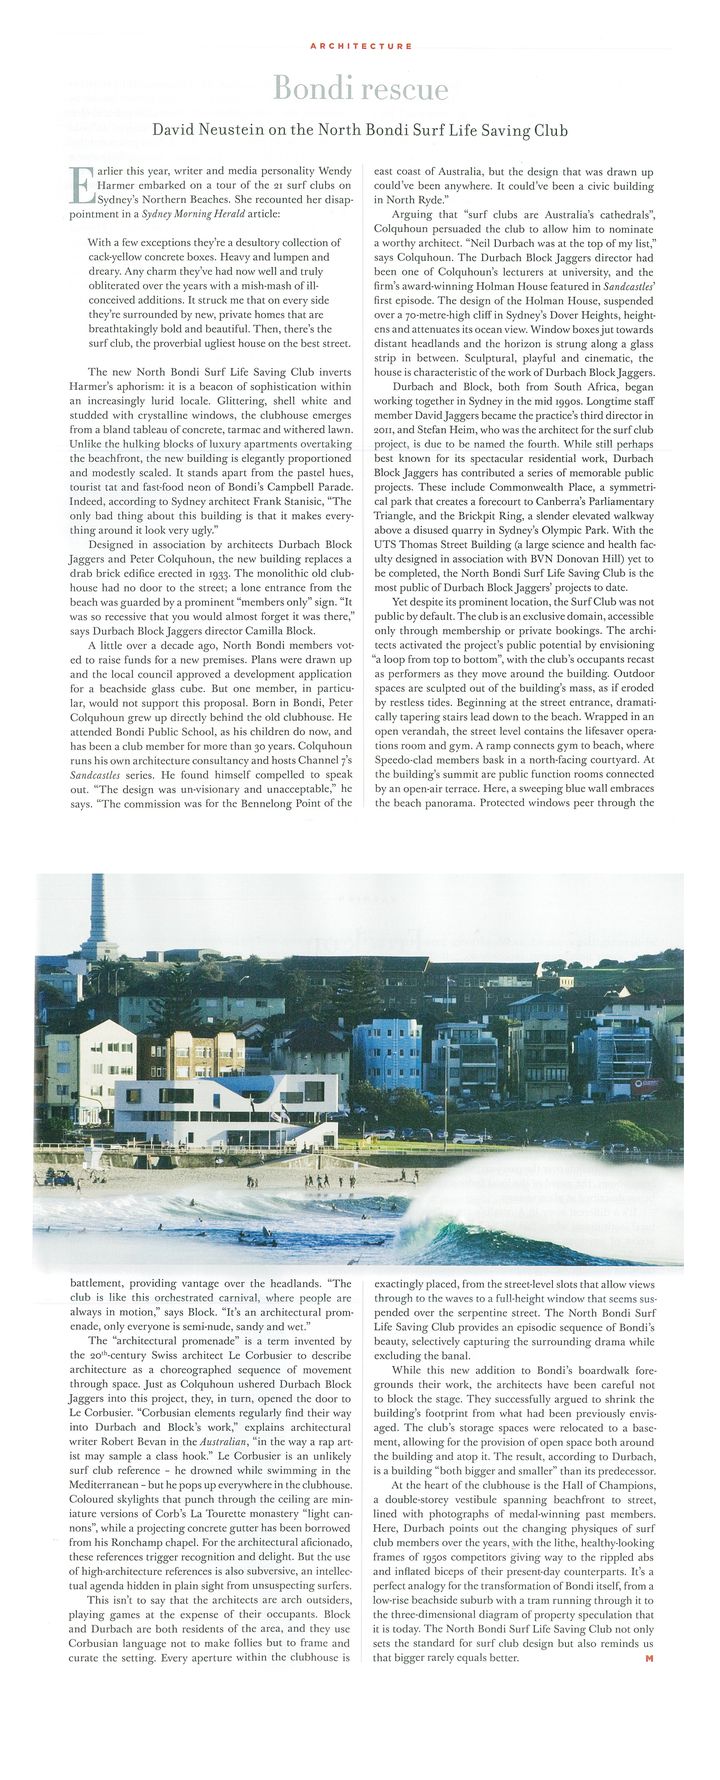  The Monthly Magazine Profiles DBJ and NBSLSC